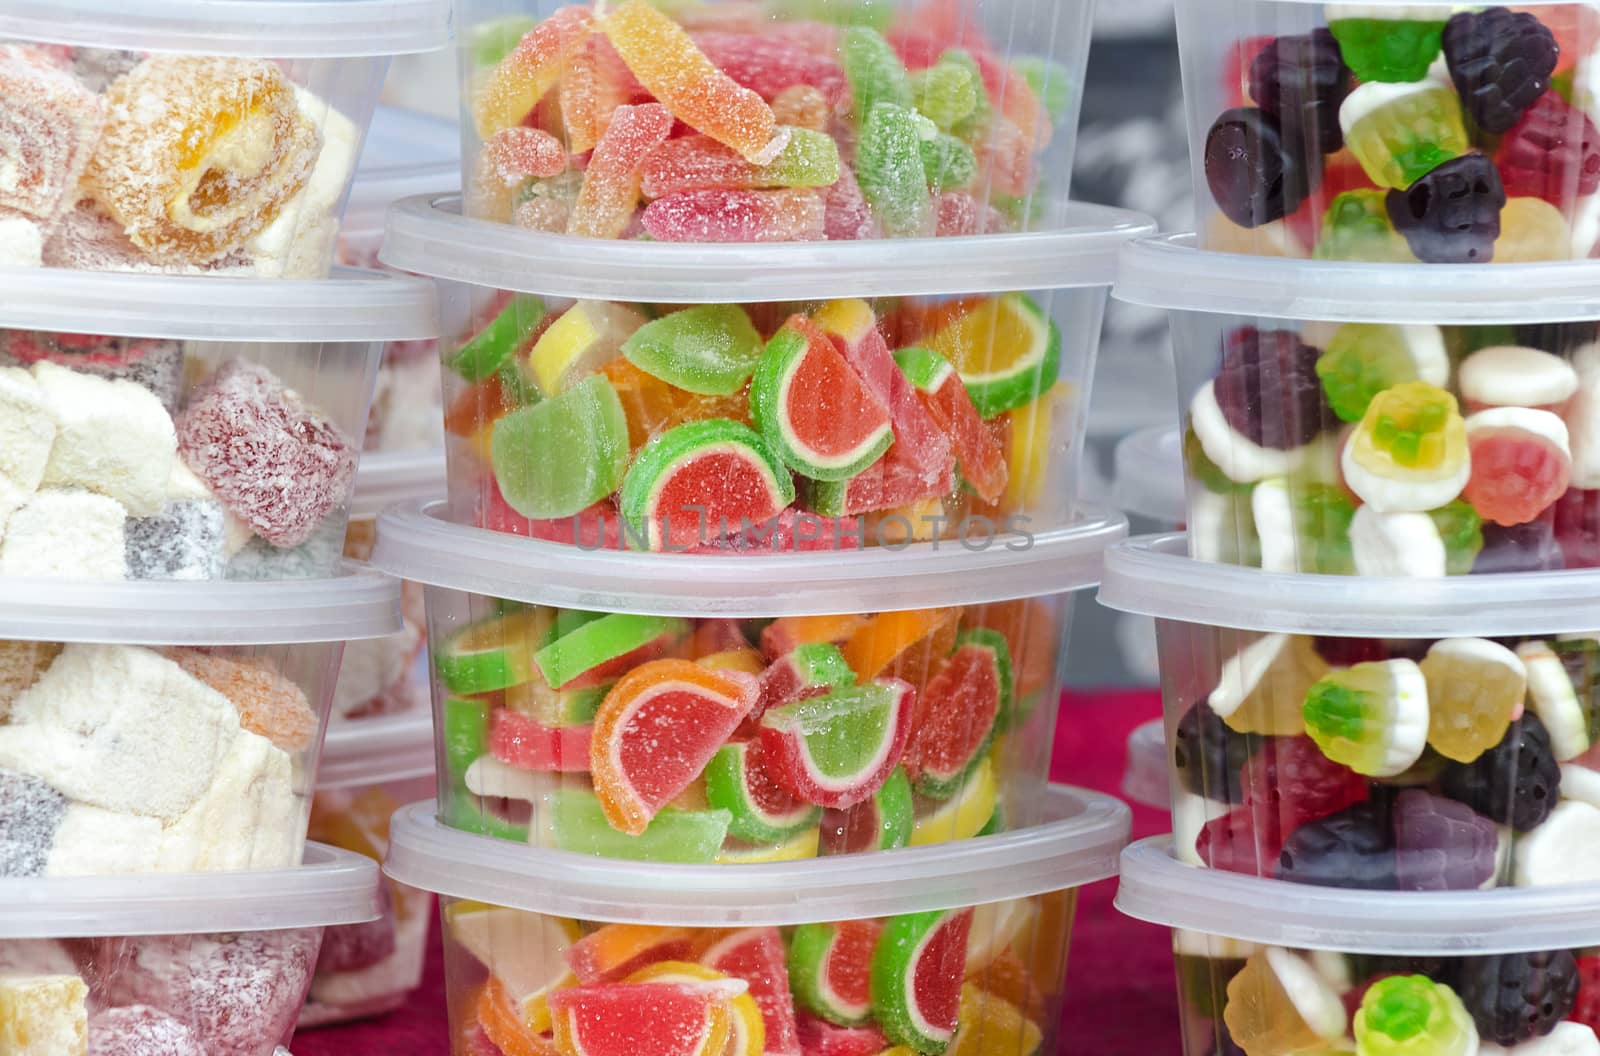 Different candies in plastic containers on a market stall.